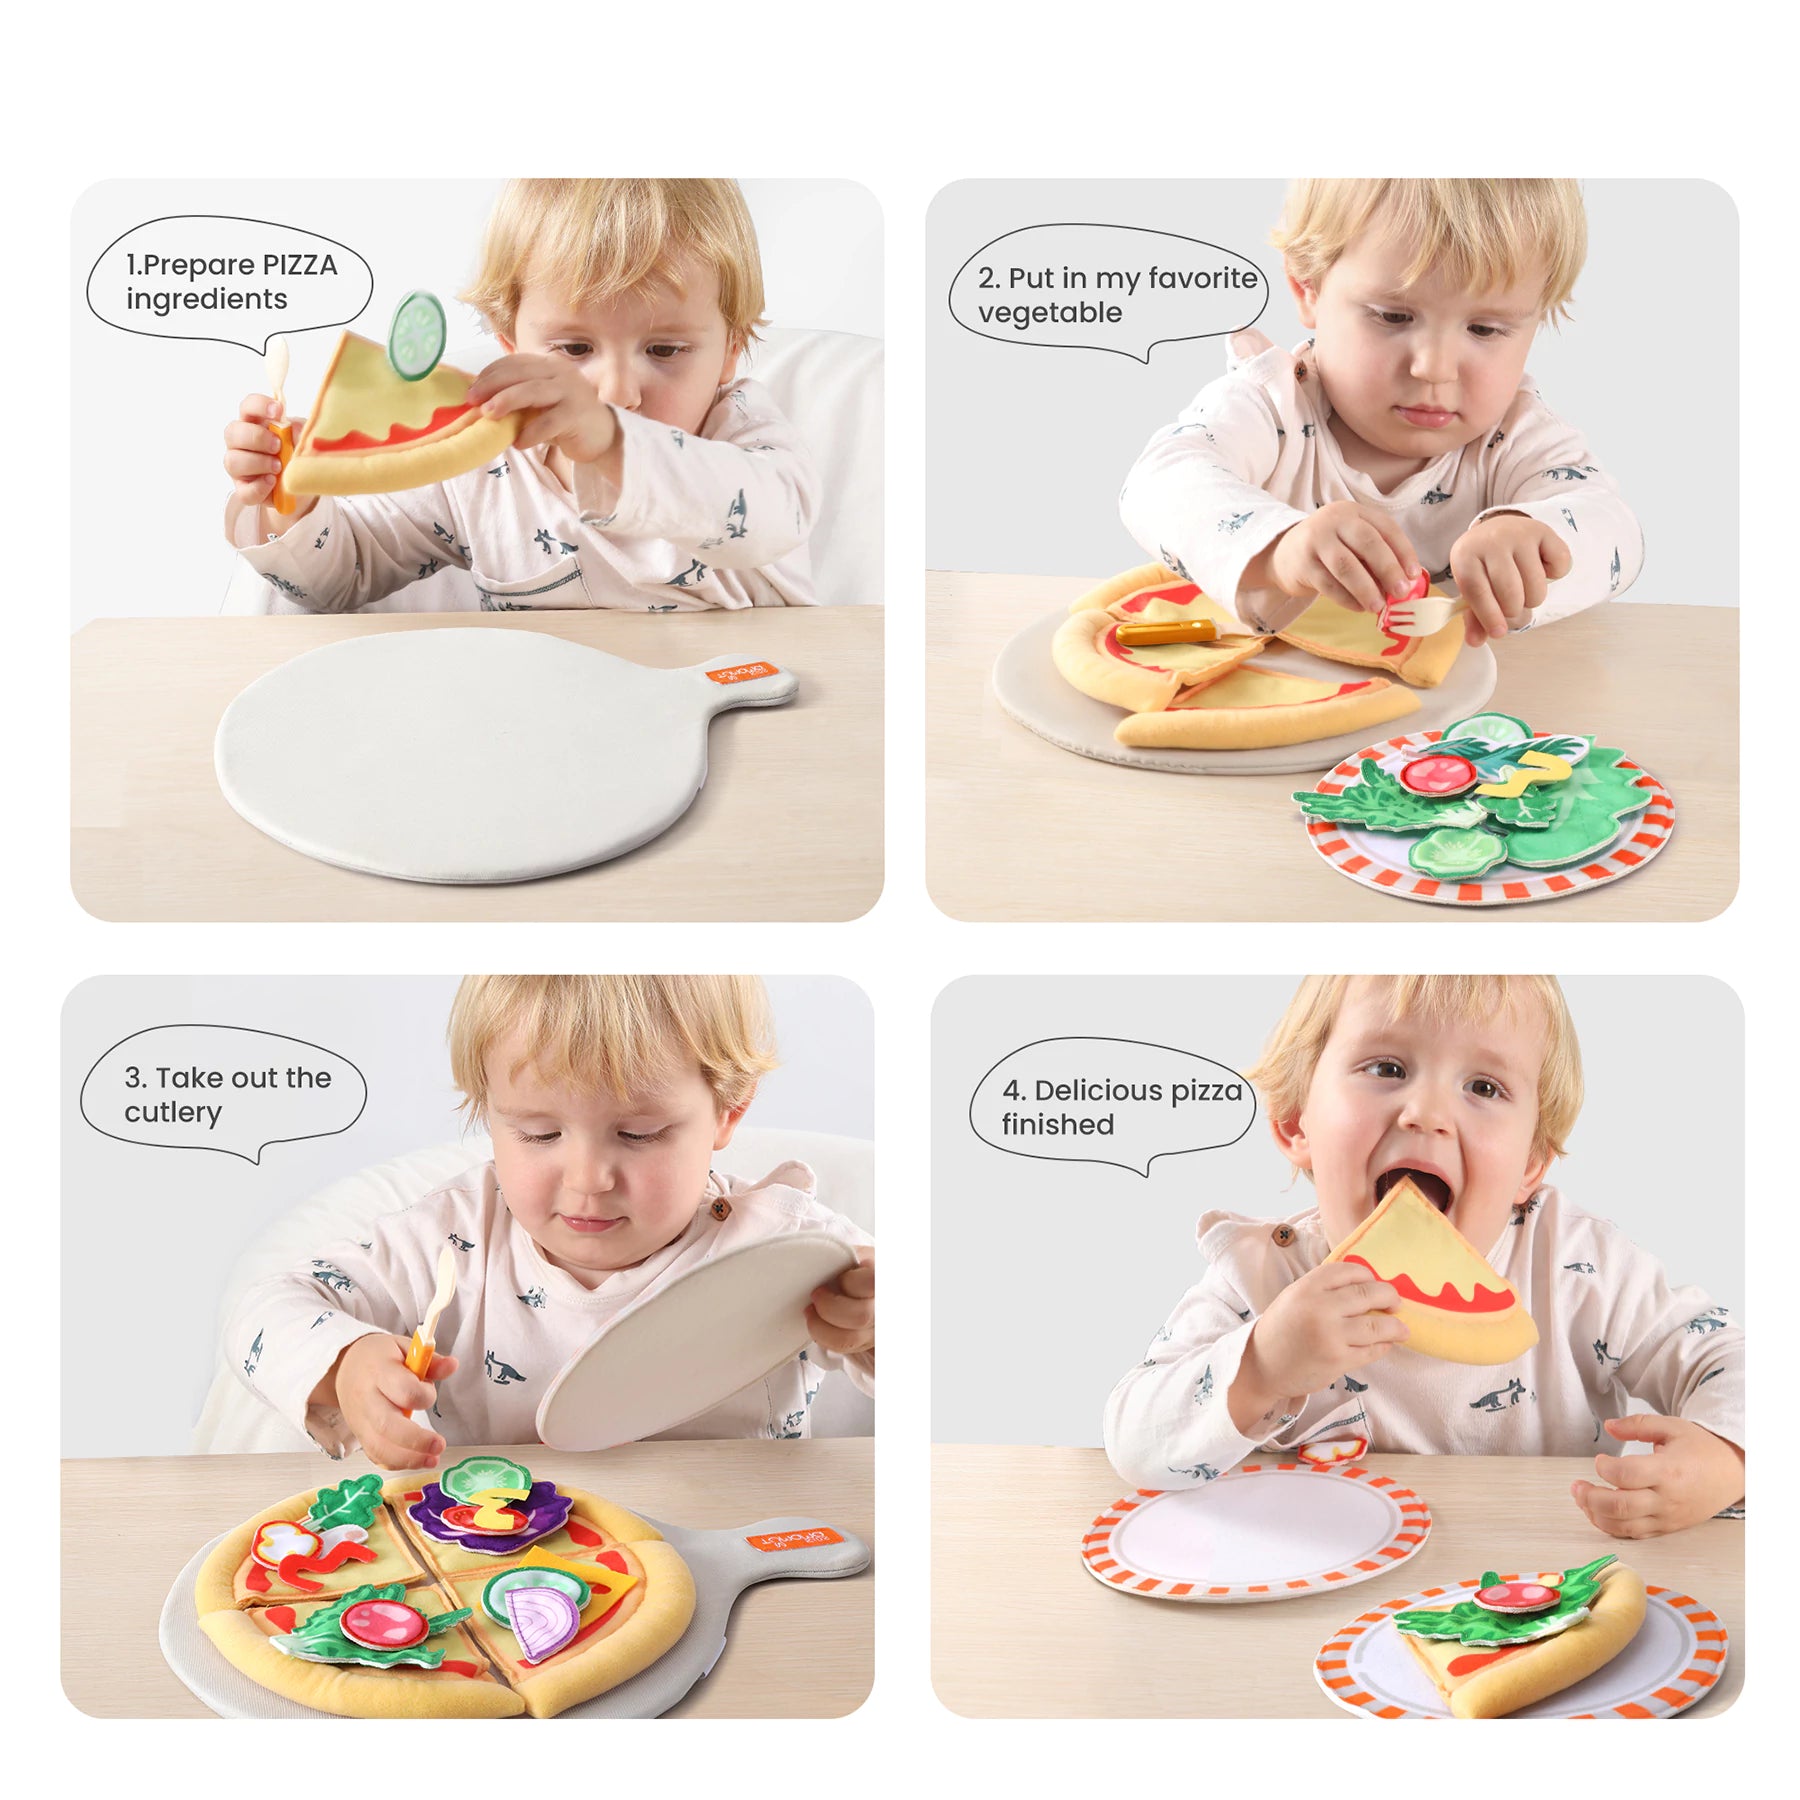 Simulation pizza salad steak play set for interactive learning